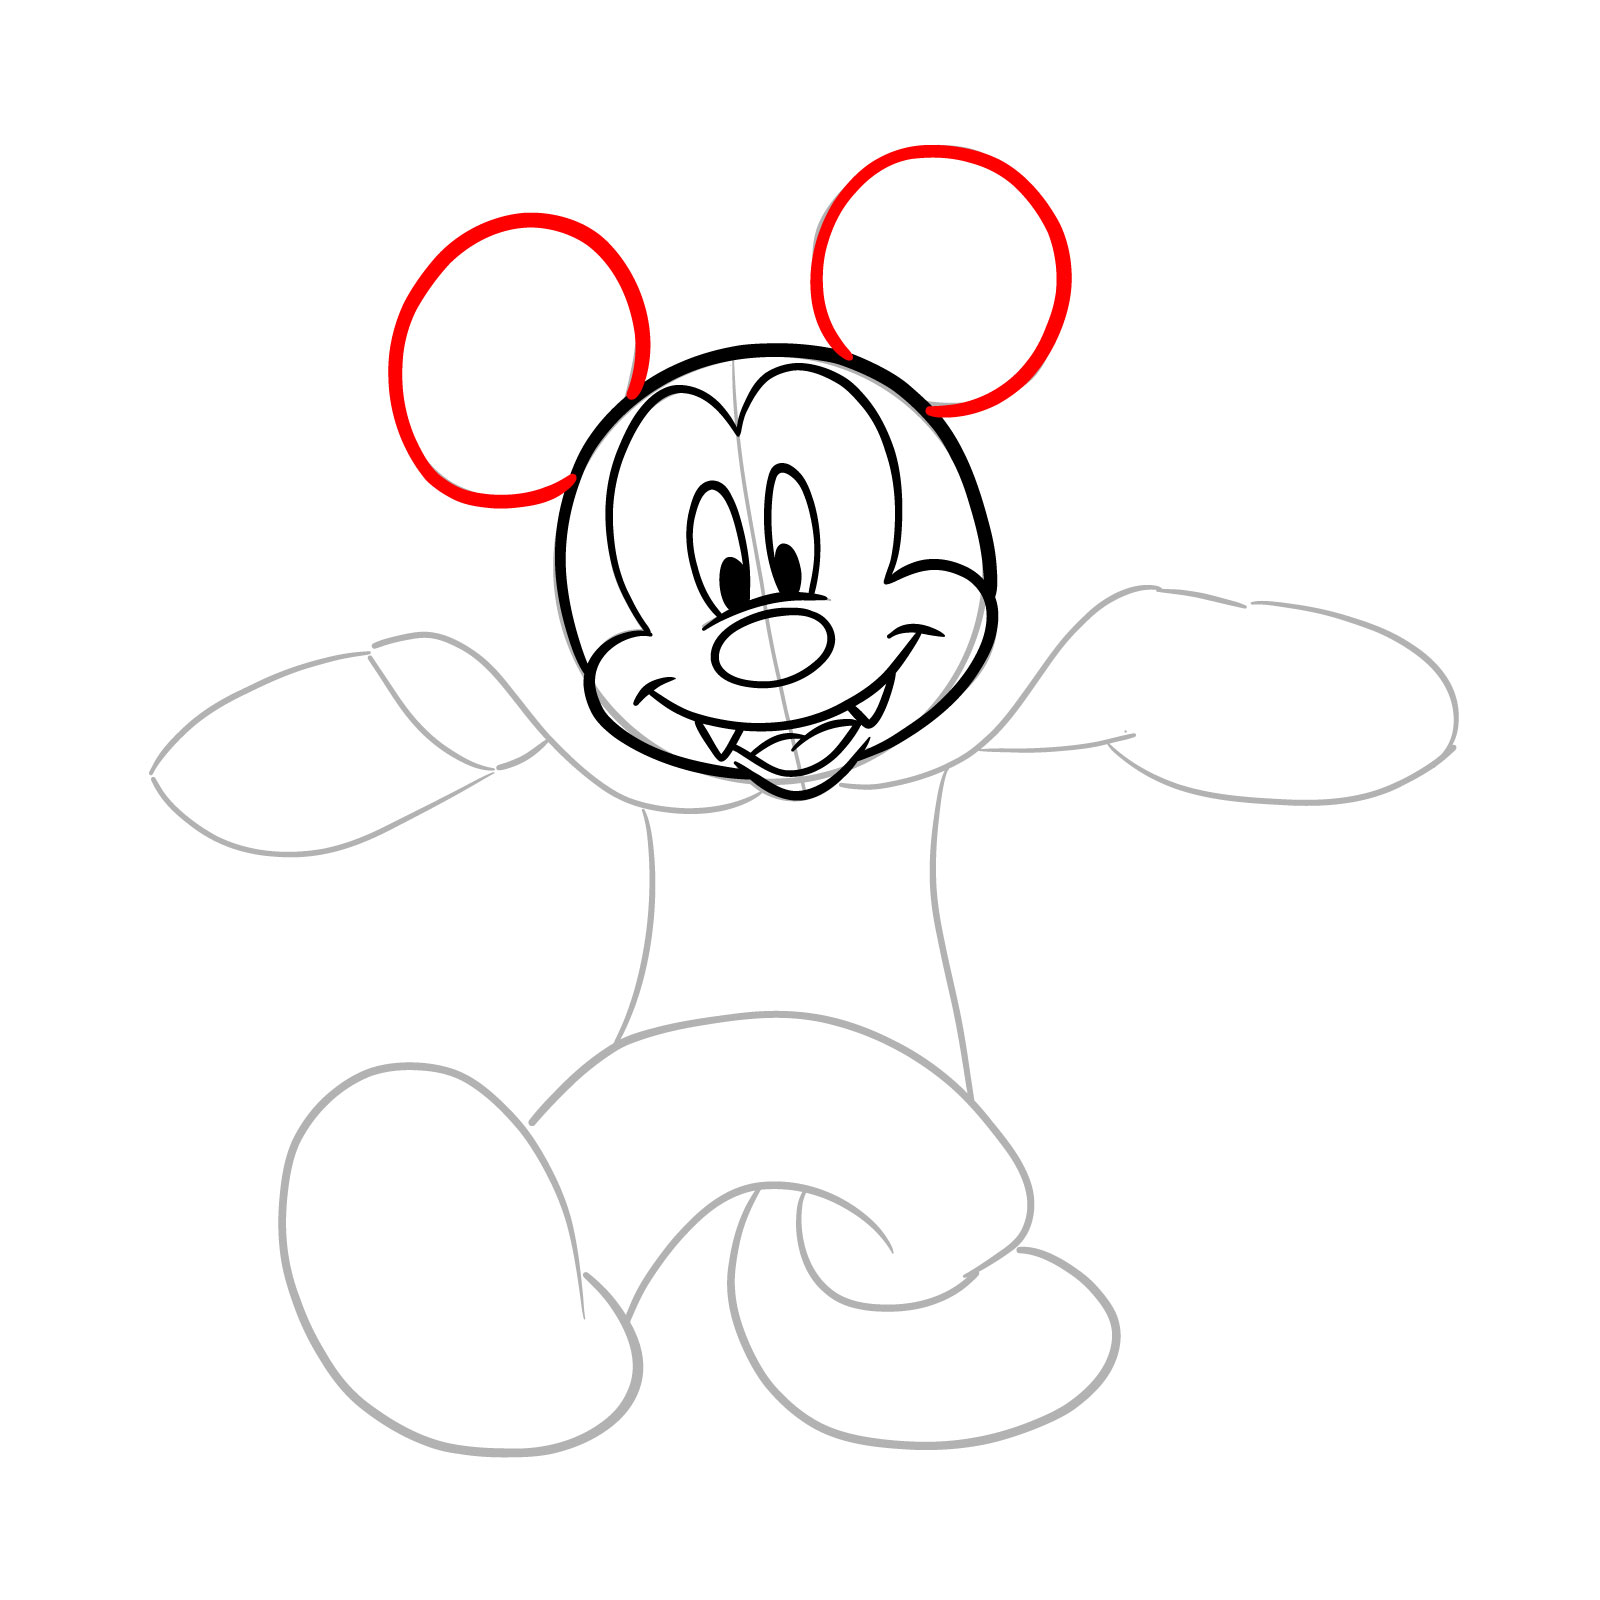 How to draw Dracula Mickey Mouse - step 11